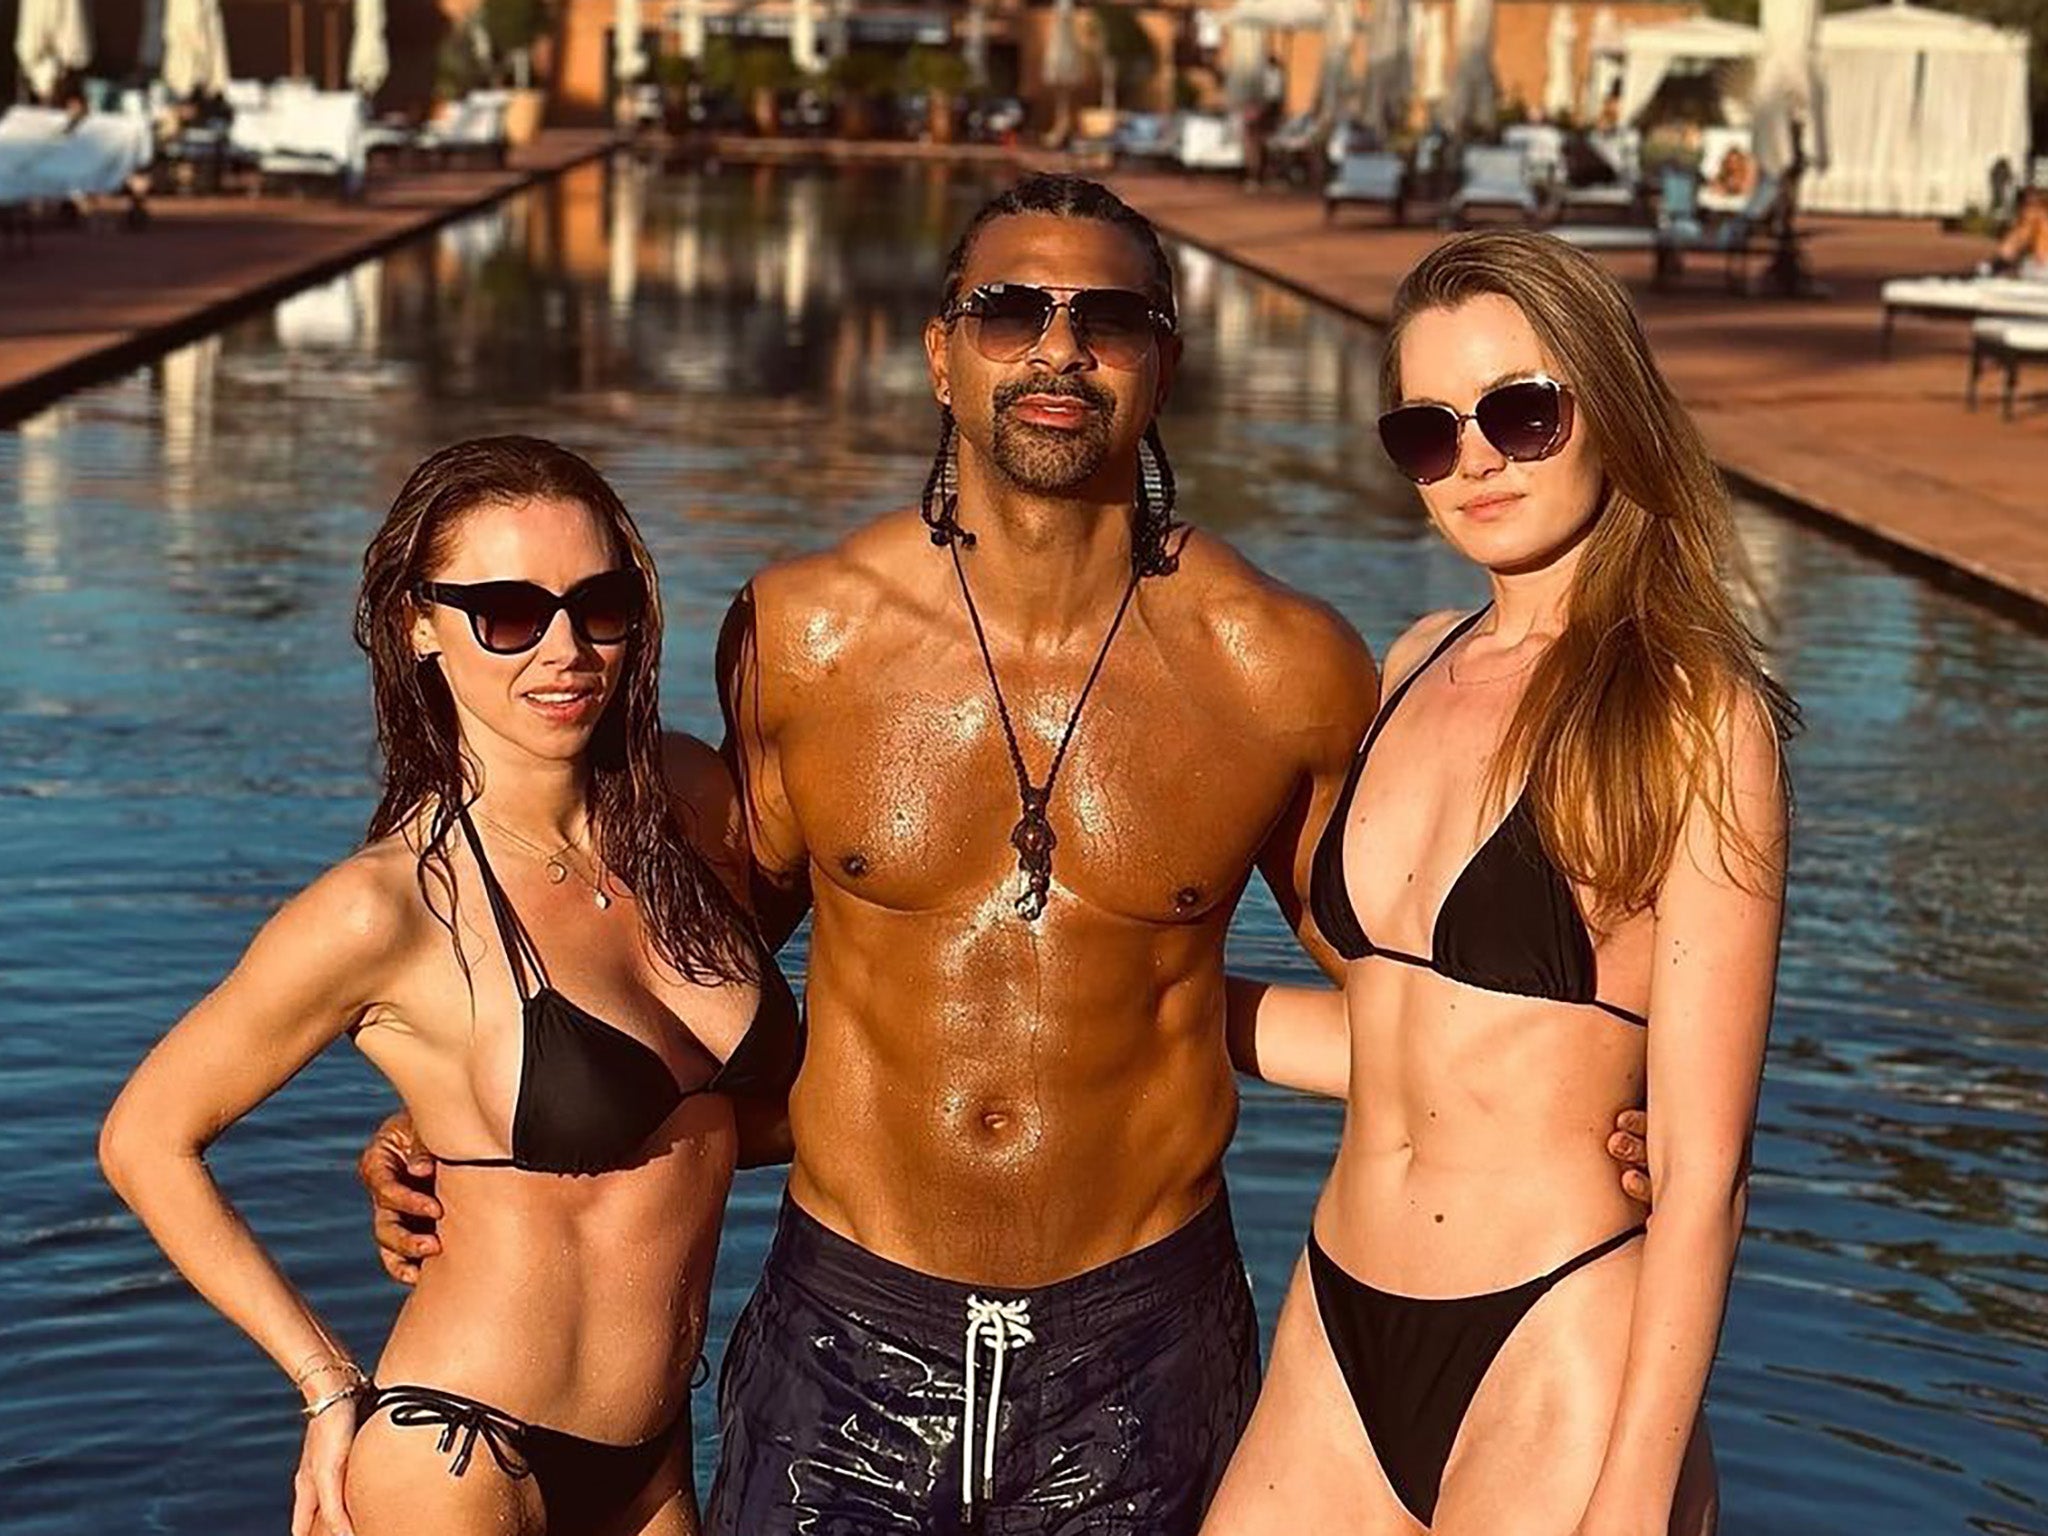 David Haye, Una Healy and Sian Osborne Can throuples or triad relationships really work? The Independent picture